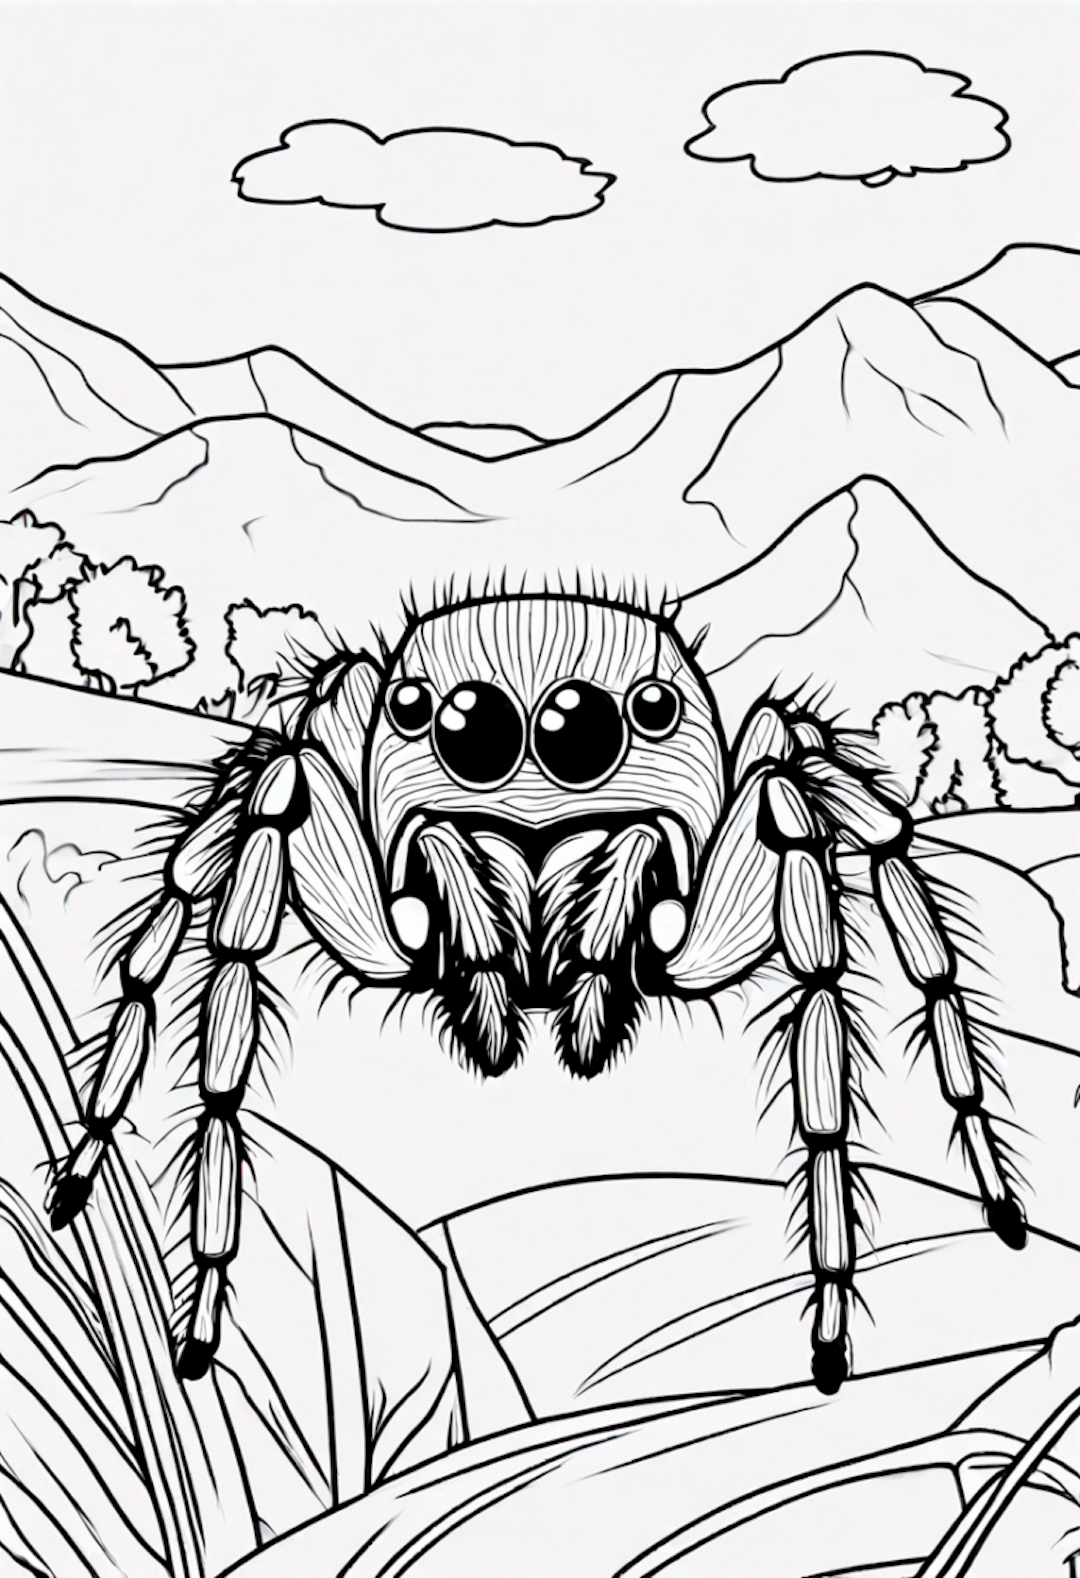 Spider Crawling in Front of Mountains Coloring Page coloring pages